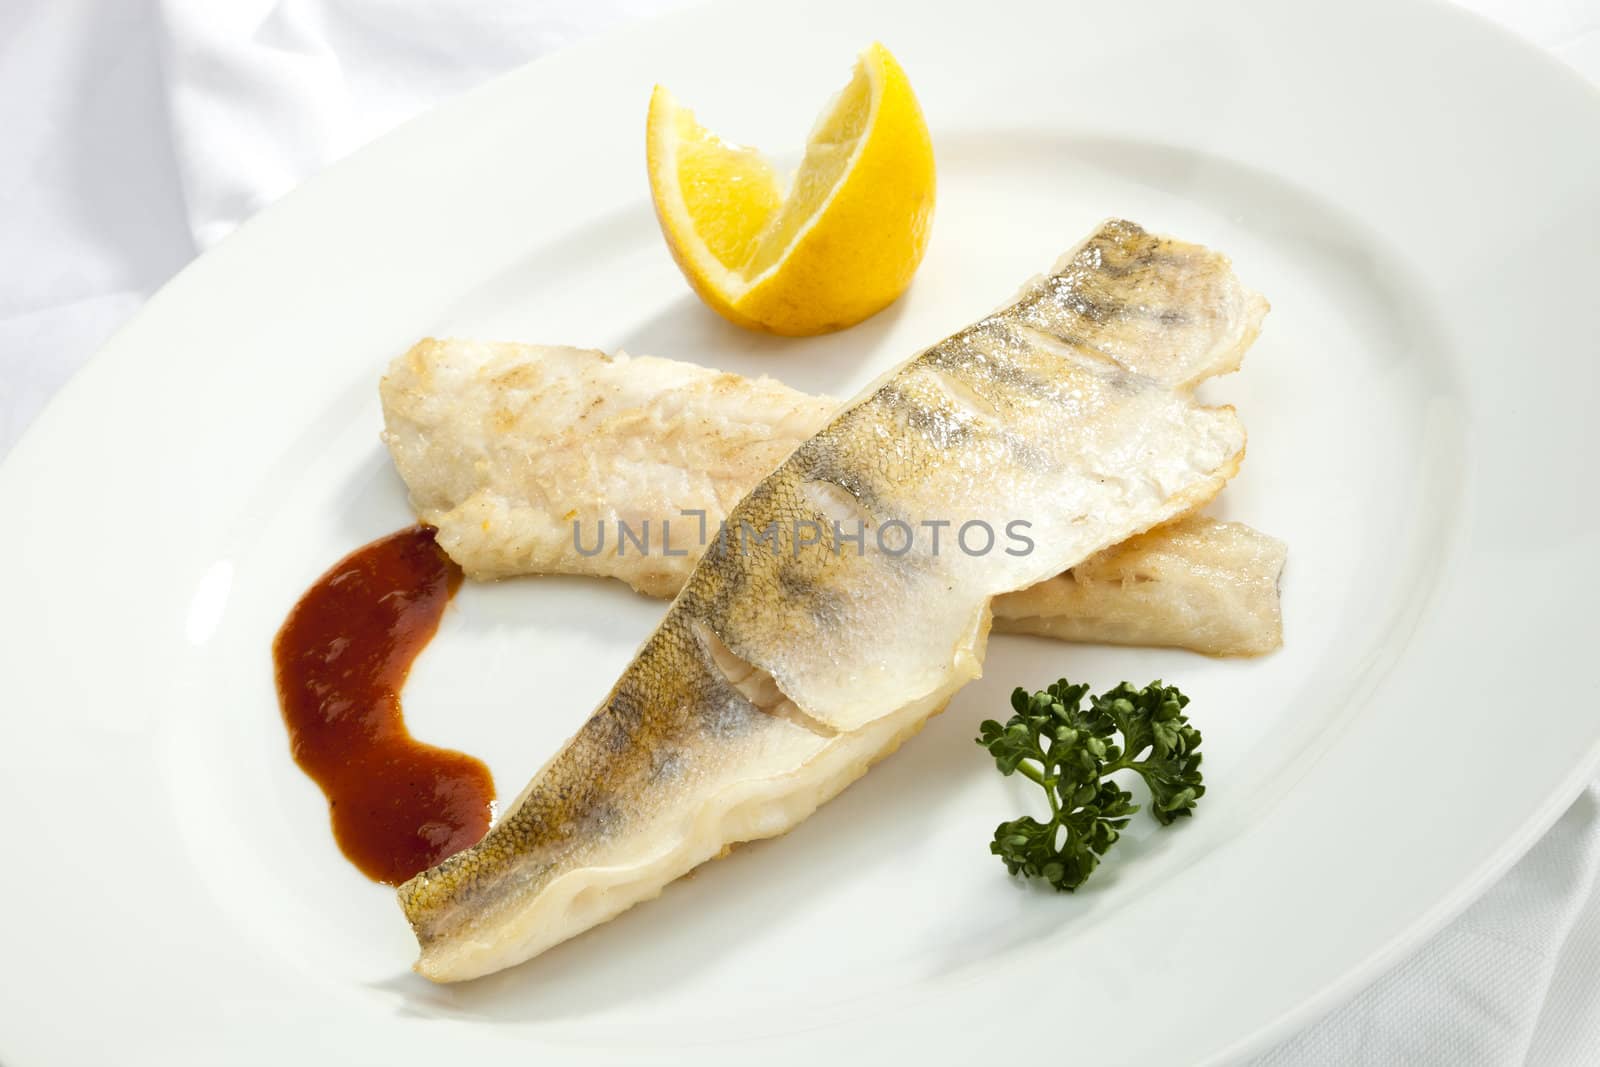 Grilled Pikeperch with lemon and tomato sauce